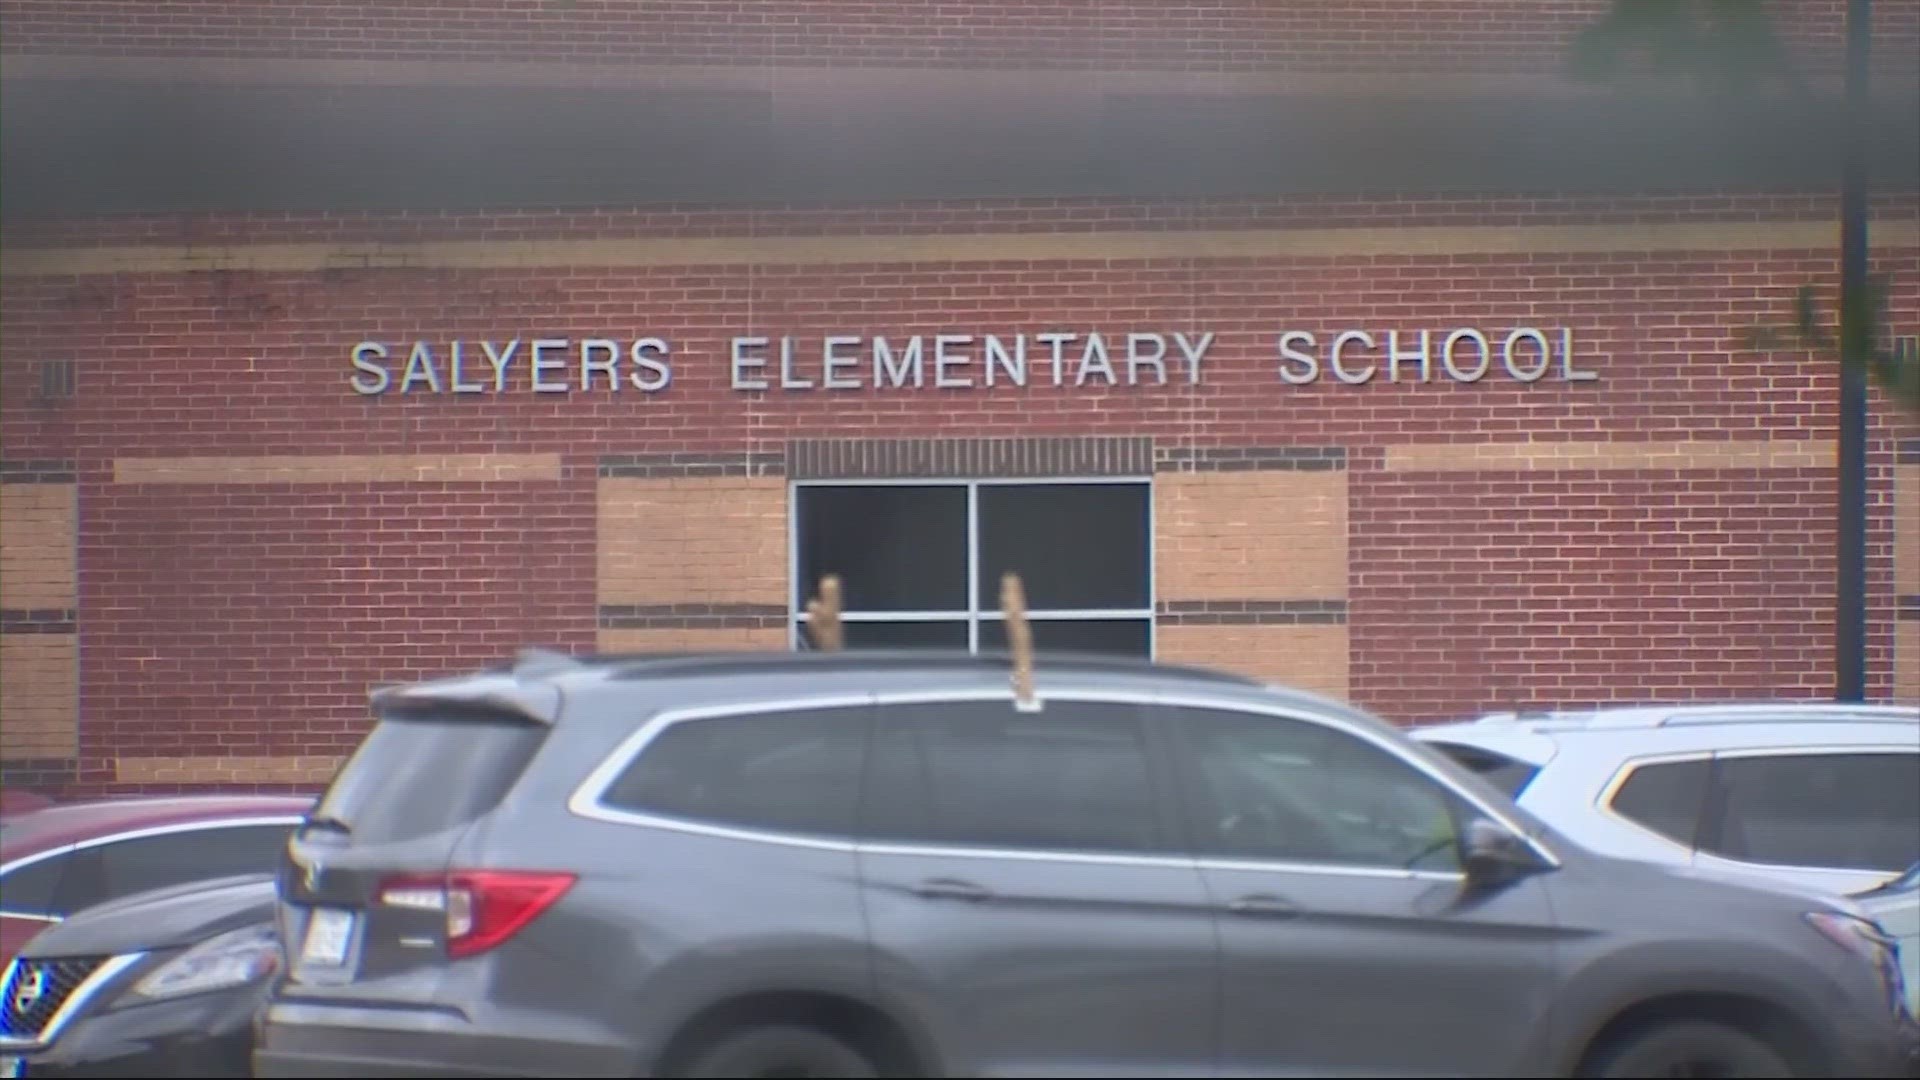 The International School at Salyers staff member has been removed from campus and placed on administrative leave.